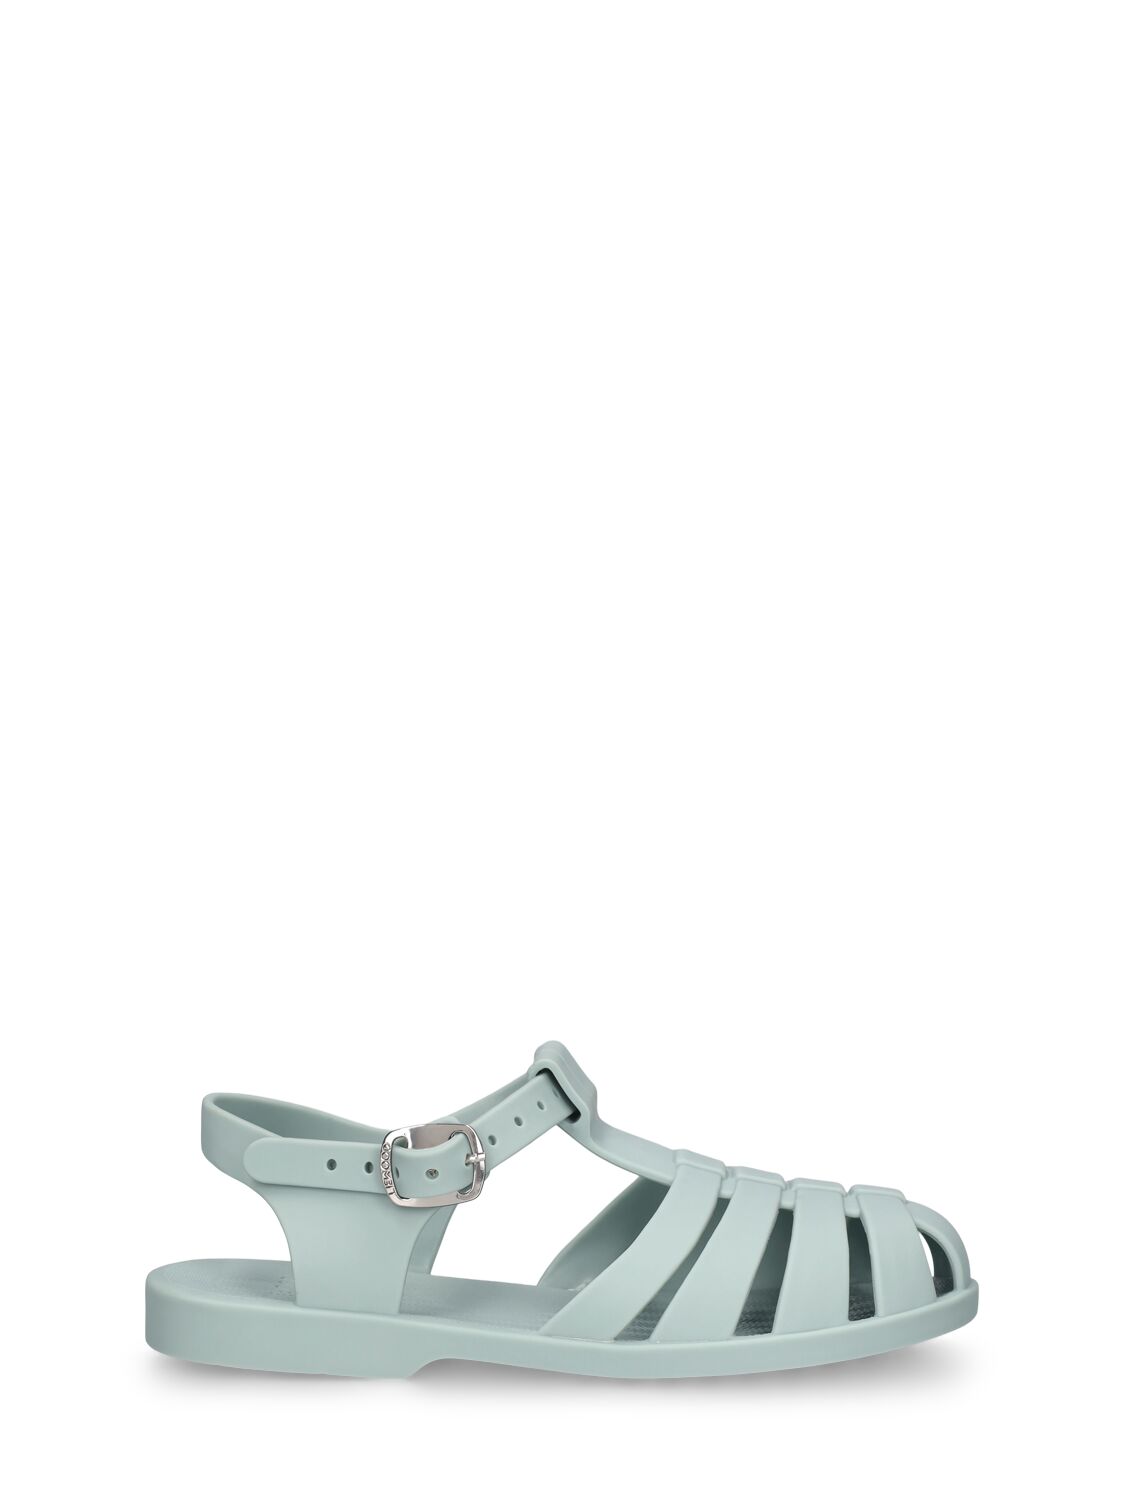 Liewood Kids' Rubber Jelly Sandals In Light Blue